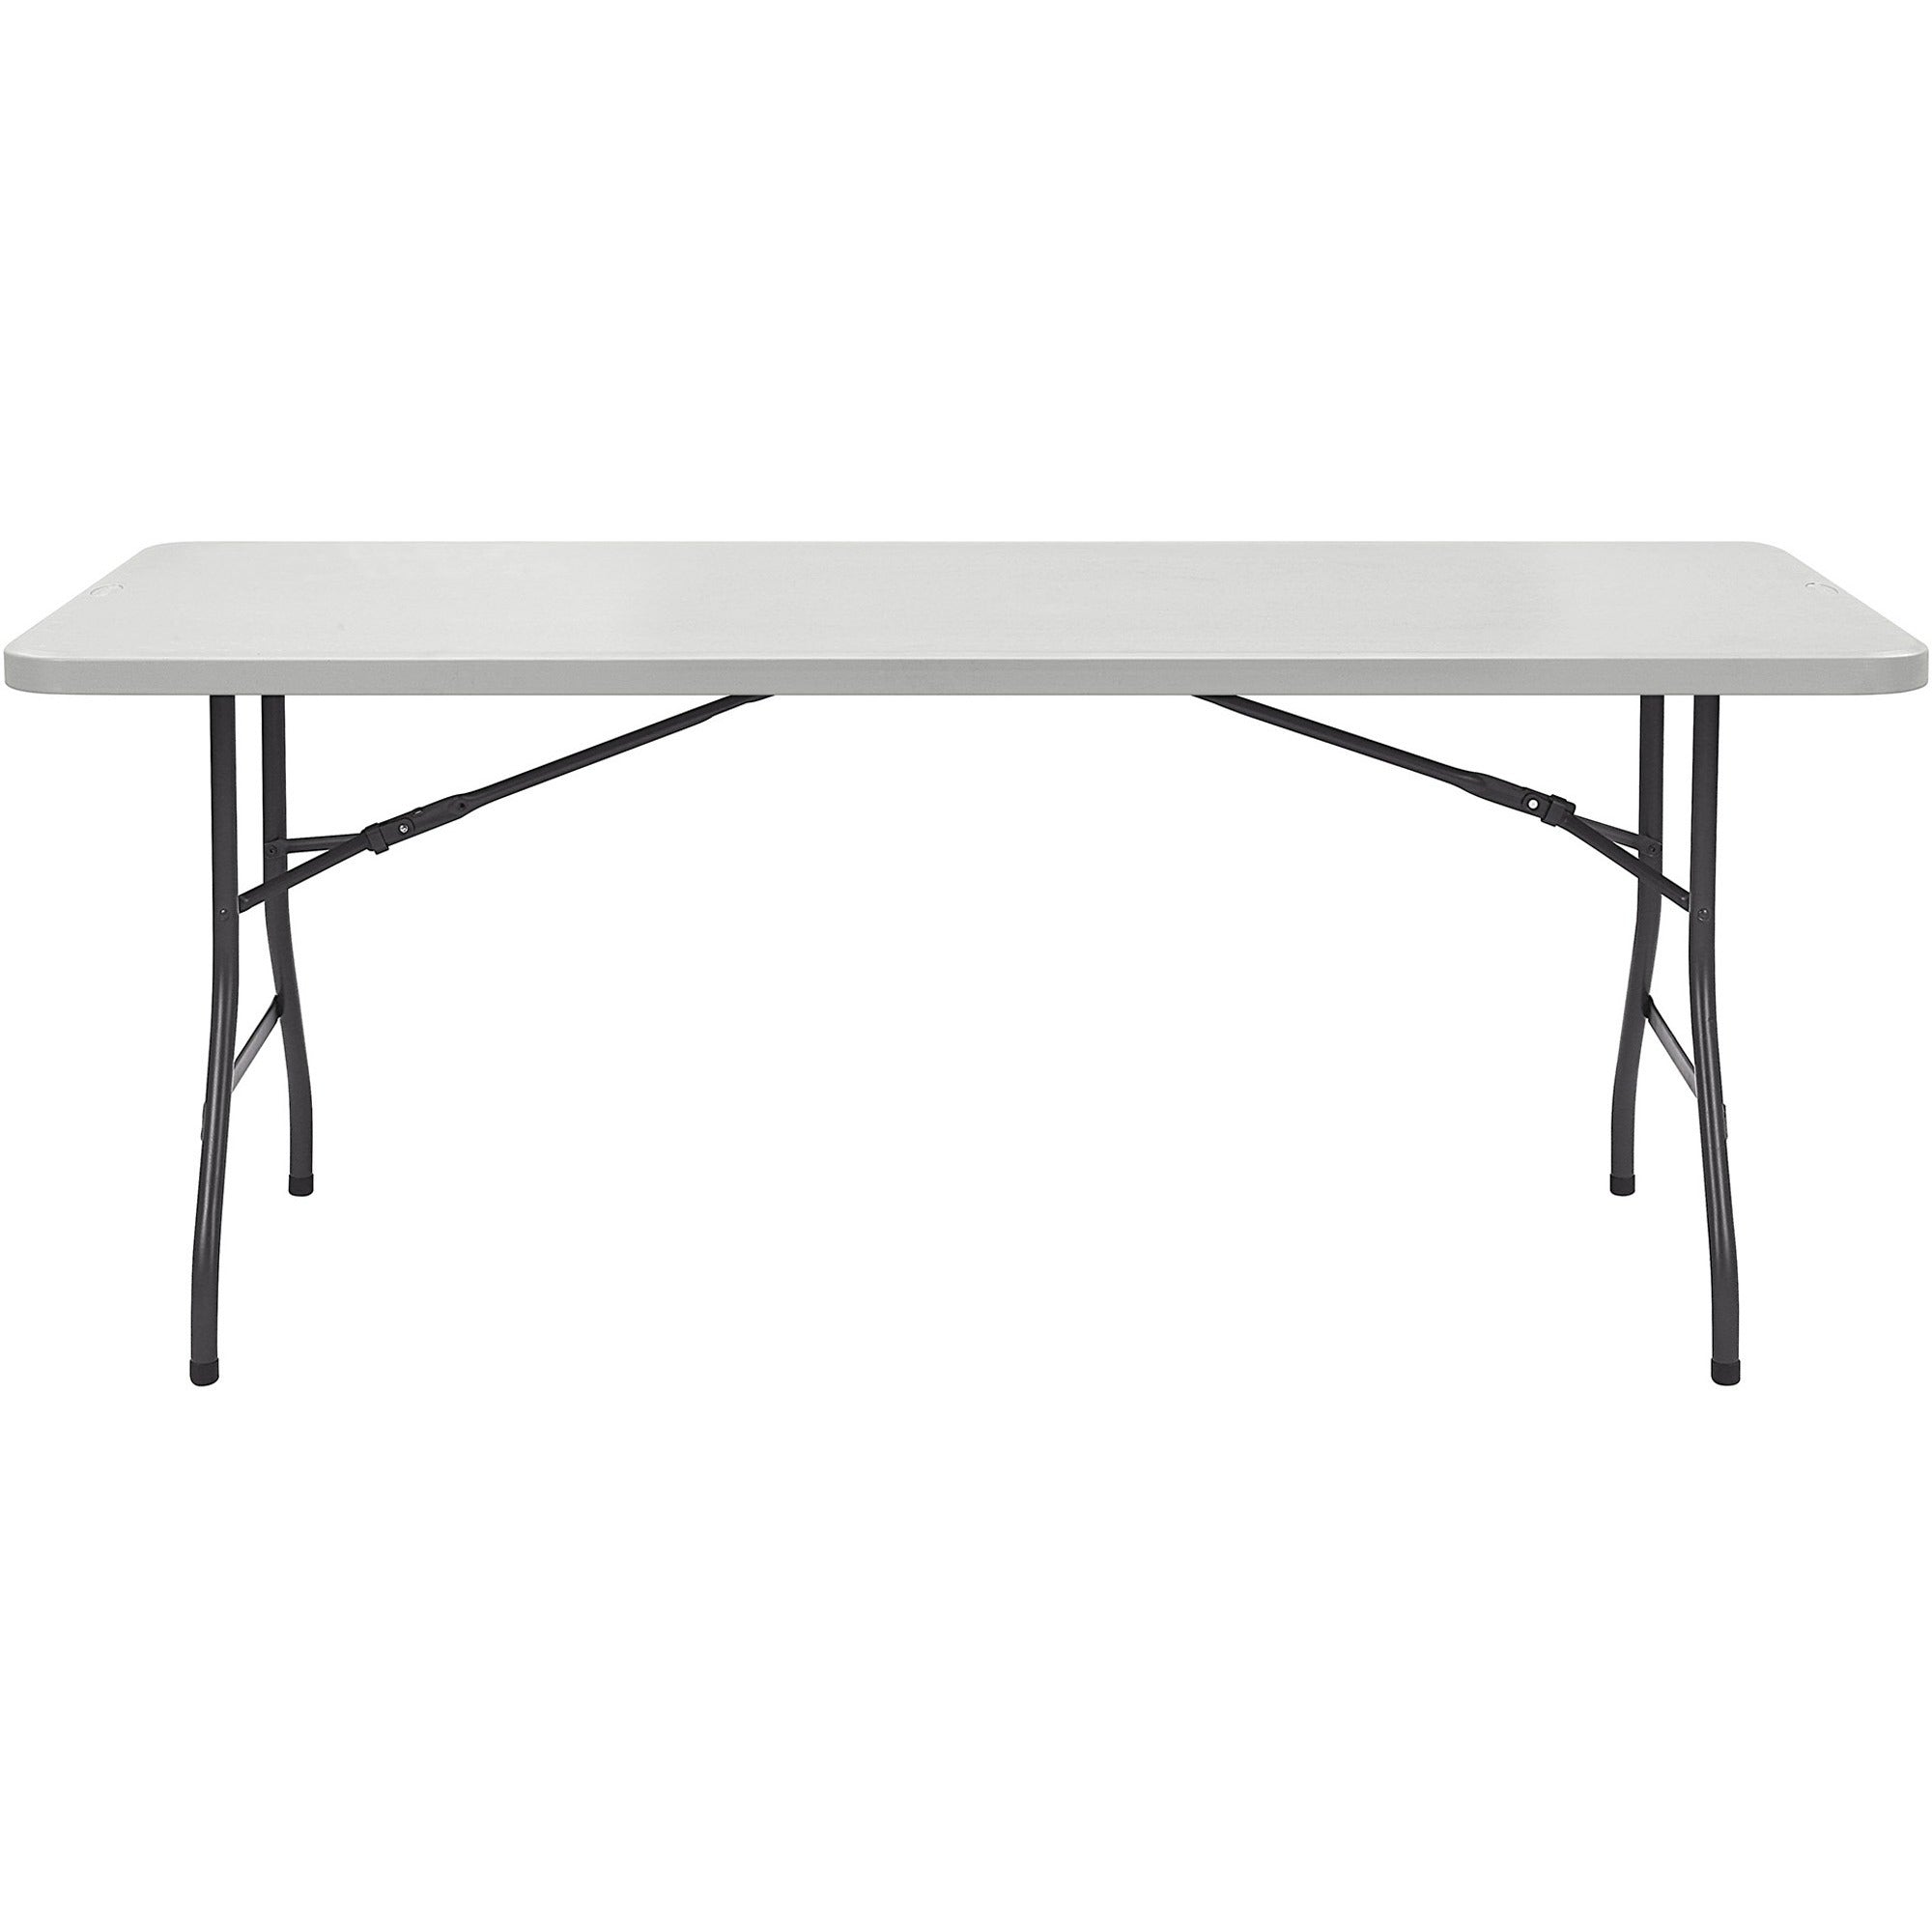 lorell-ultra-lite-banquet-table-for-table-toplight-gray-rectangle-top-dark-gray-base-600-lb-capacity-x-72-table-top-width-x-30-table-top-depth-x-2-table-top-thickness-29-height-gray-1-each_llr66655 - 3